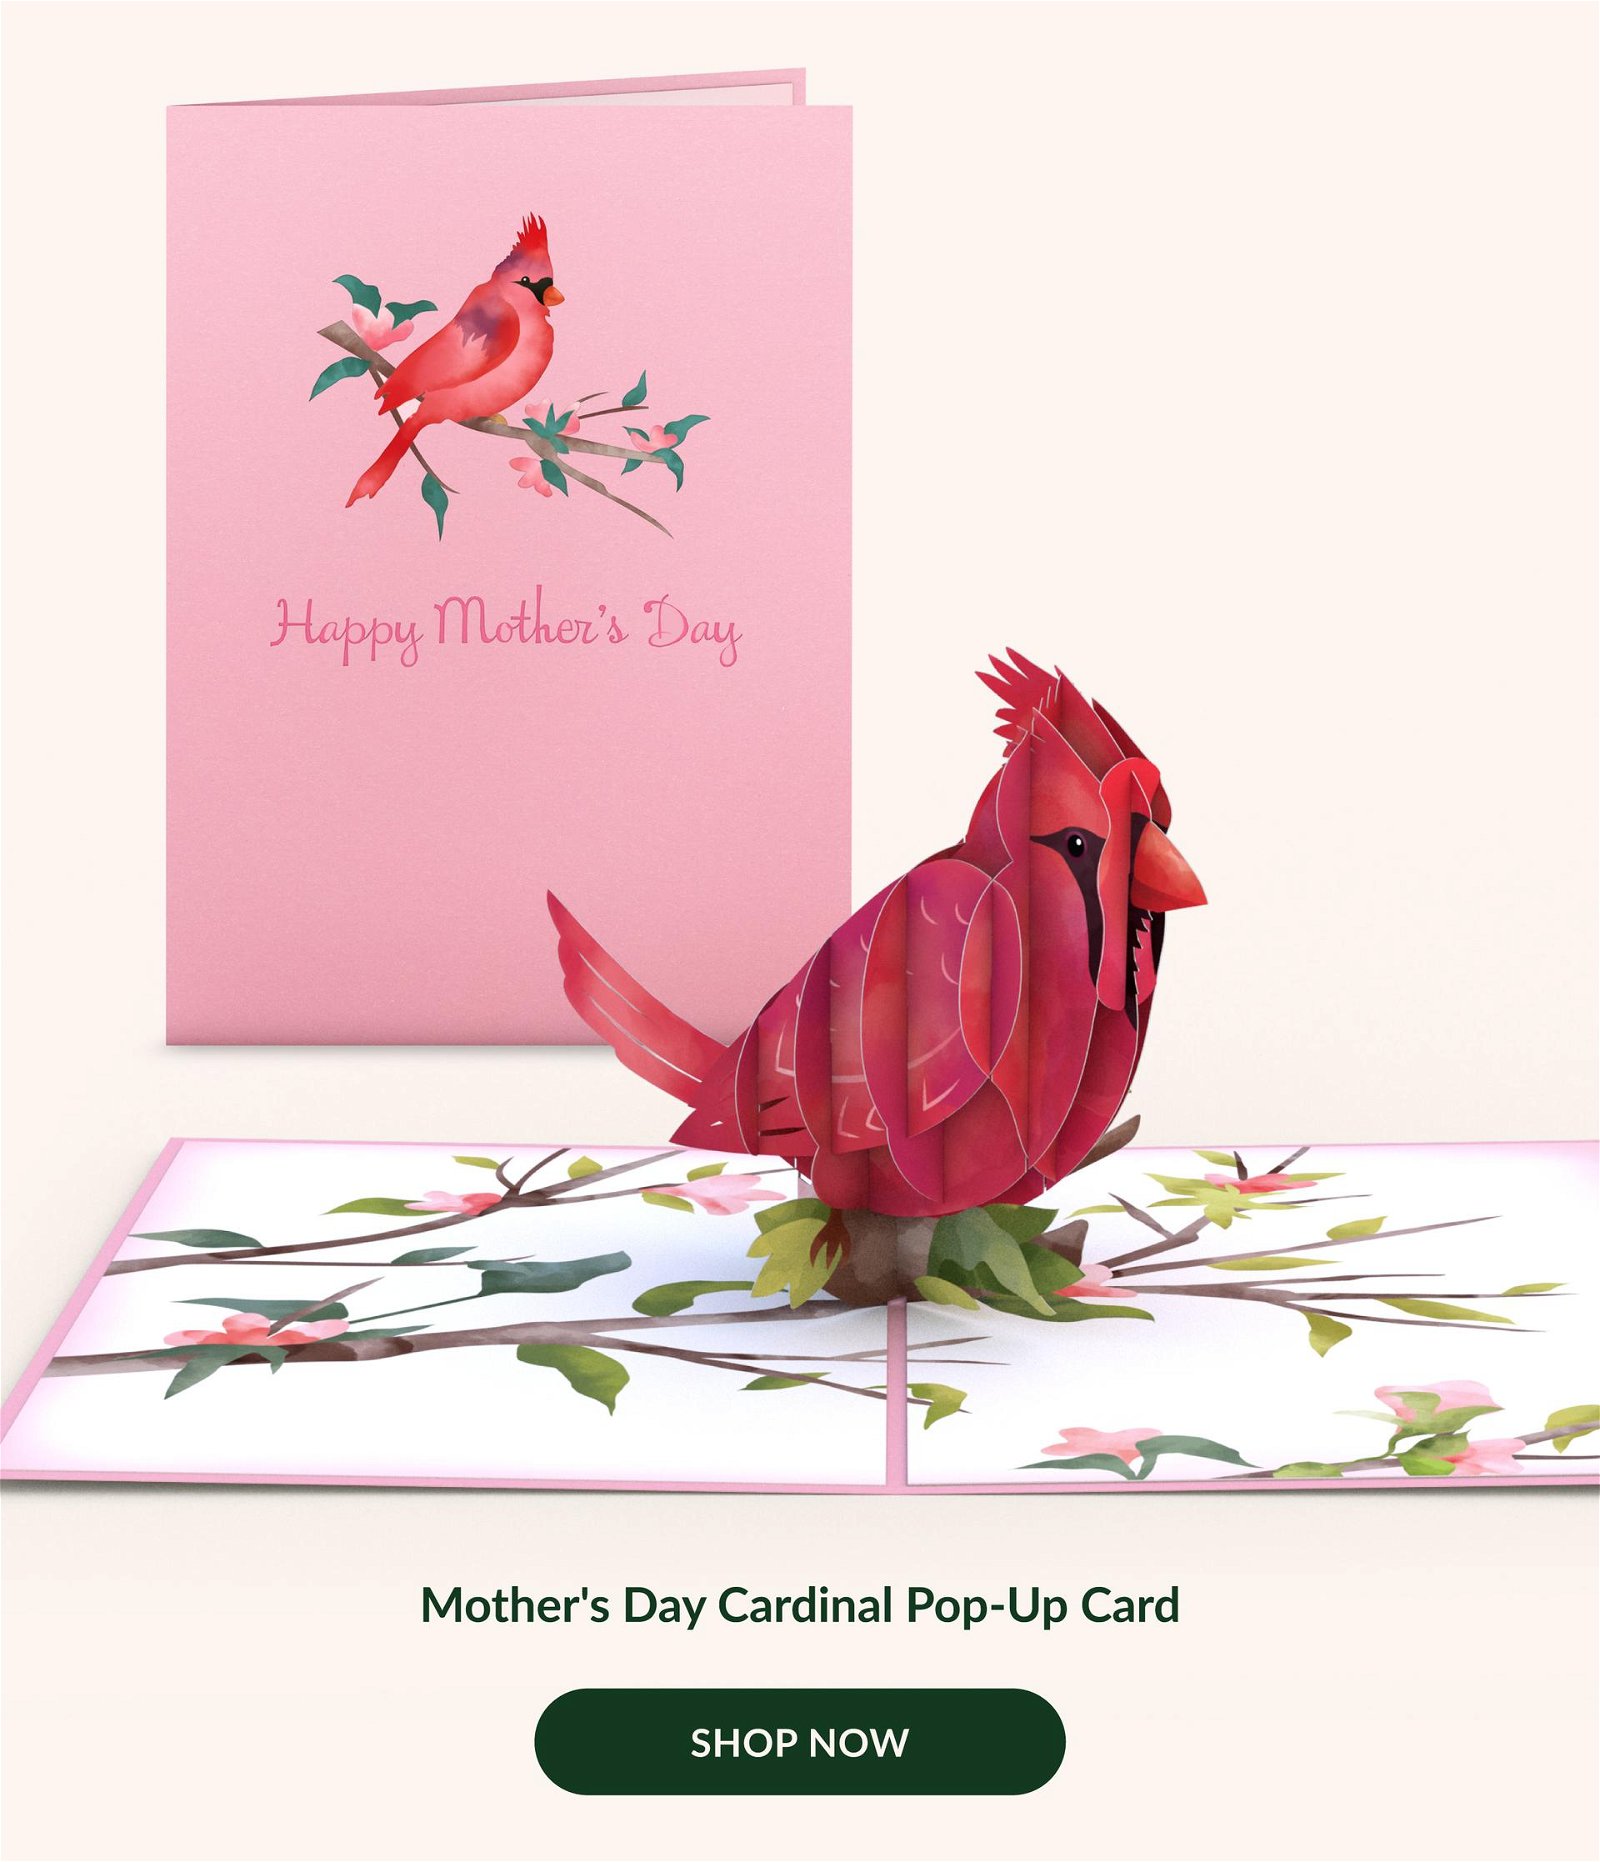 Mother's Day Cardinal Pop-Up Card | SHOP NOW